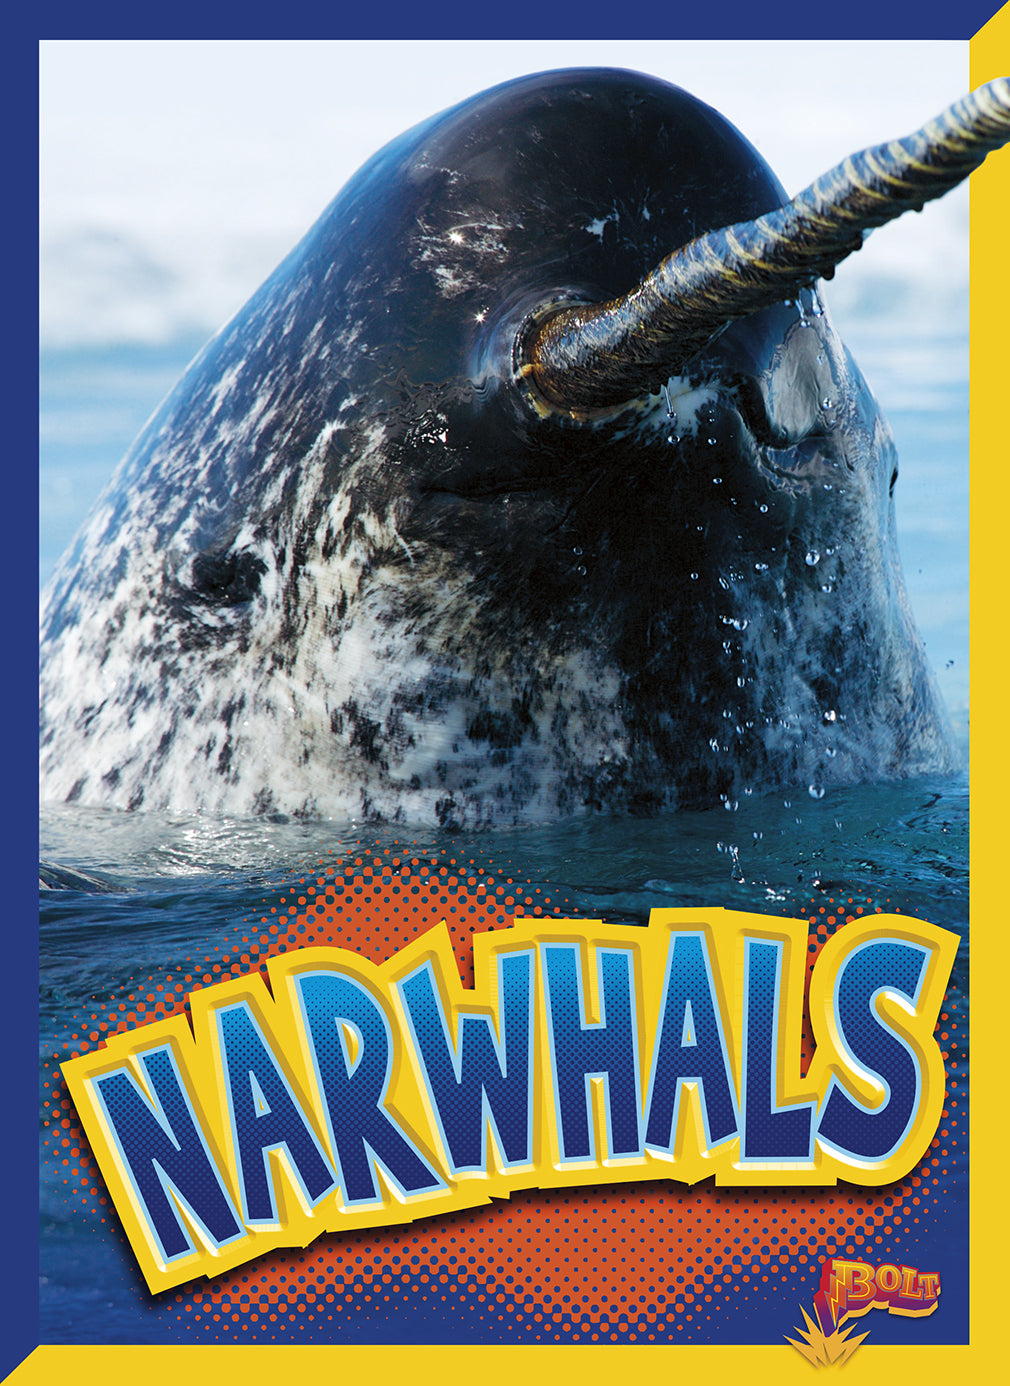 Curious Creatures: Narwhals